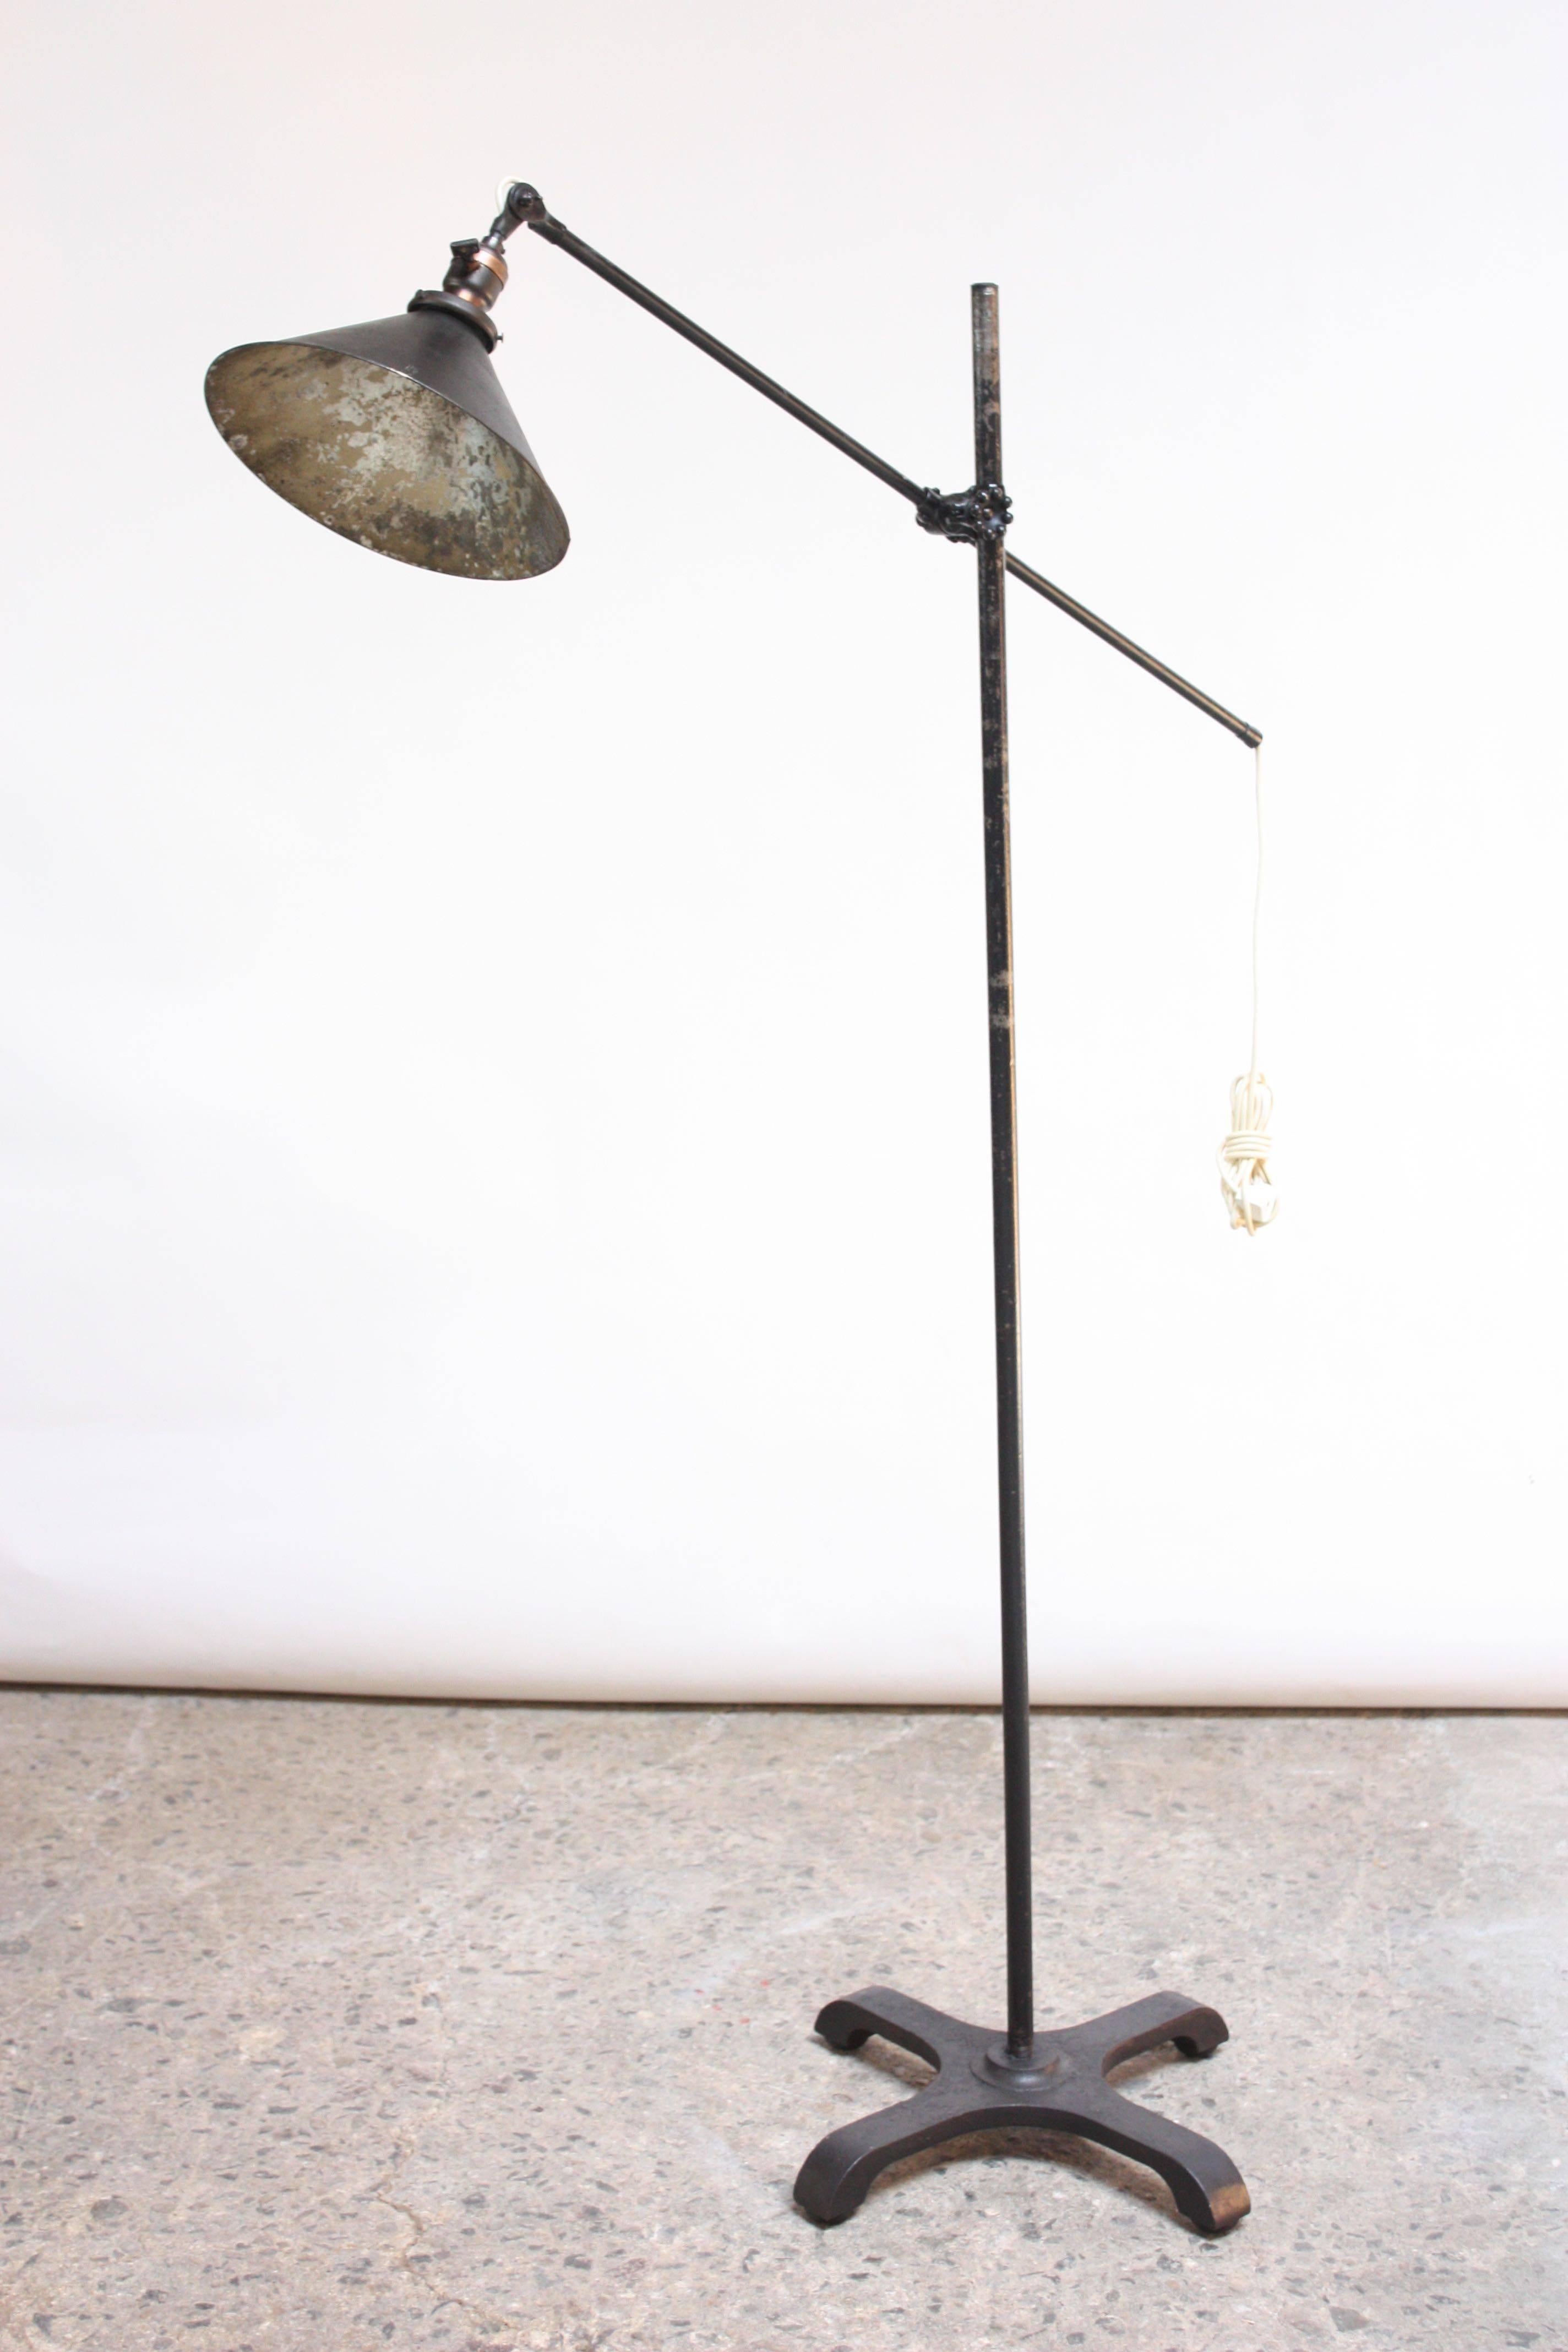 O.C. White (circa 1930s) floor lamp complete with all original parts (knobbed knuckle adjuster, socket, screws). Composed of a steel arm, stem, and base with a painted tin shade. Arm and shade are adjustable.
Original condition with only minor